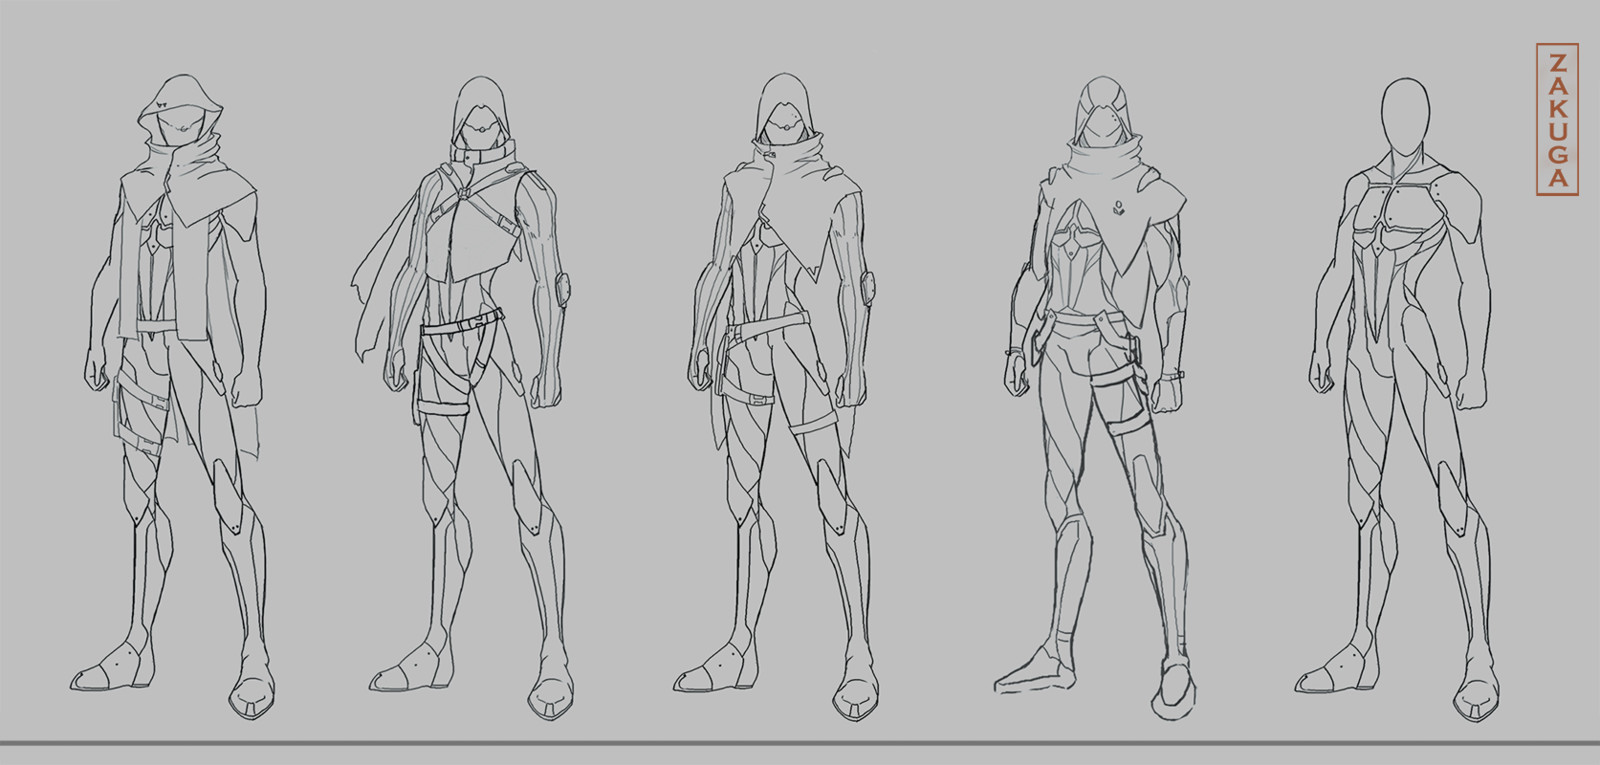 Chosen concept shape with outfit changes